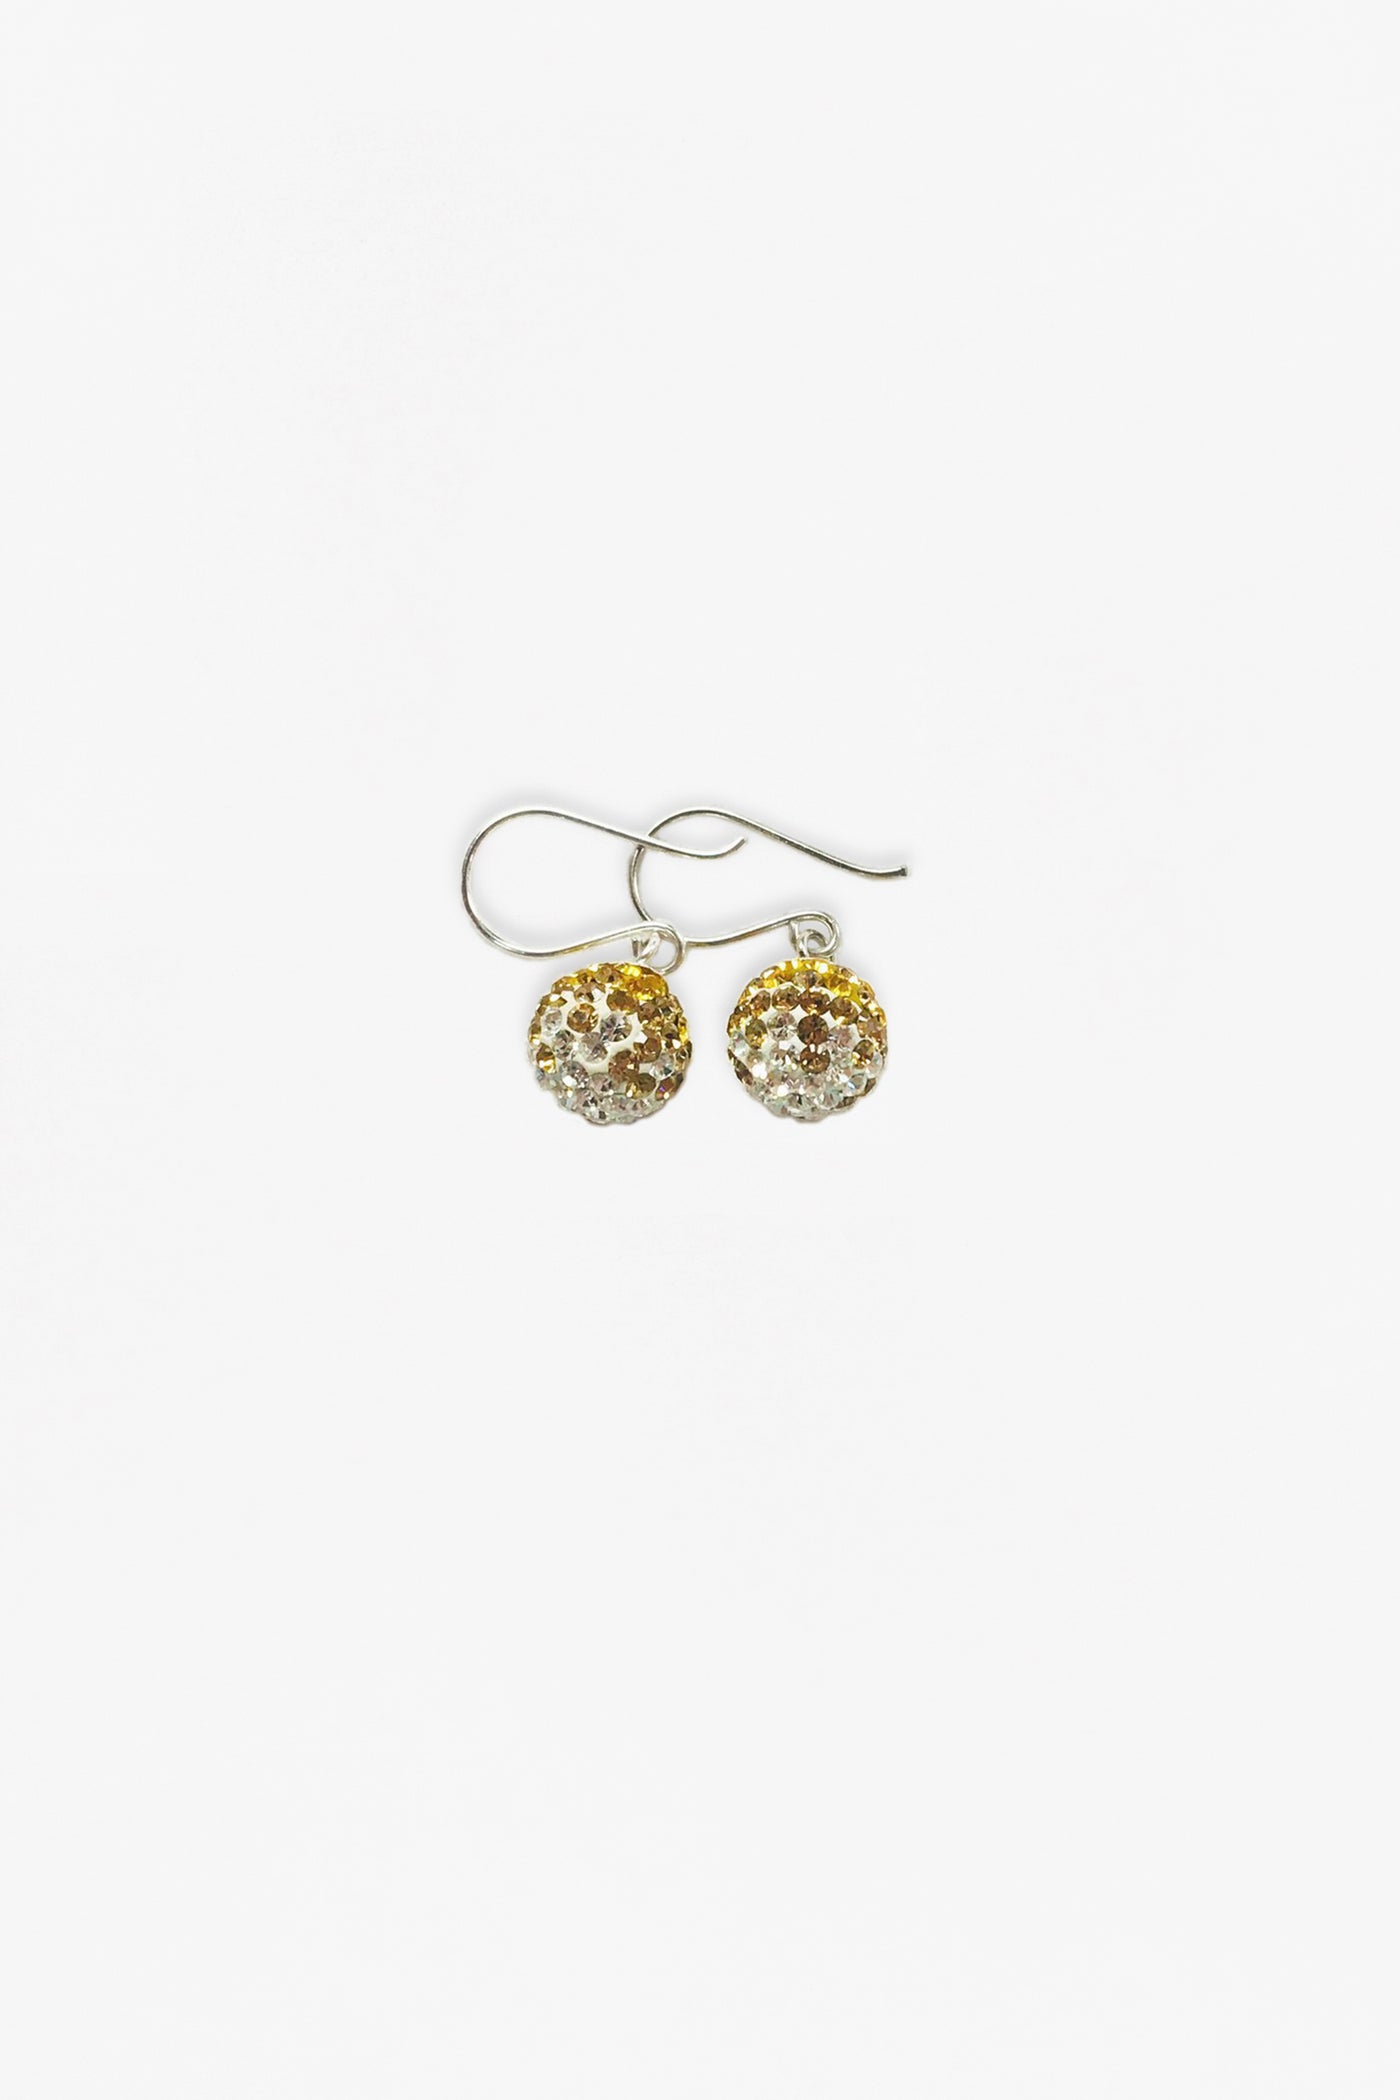 8mm Disco Ball Ombre Crystal Dangling Silver Earring in Smokey Topaz| Annie and Sisters